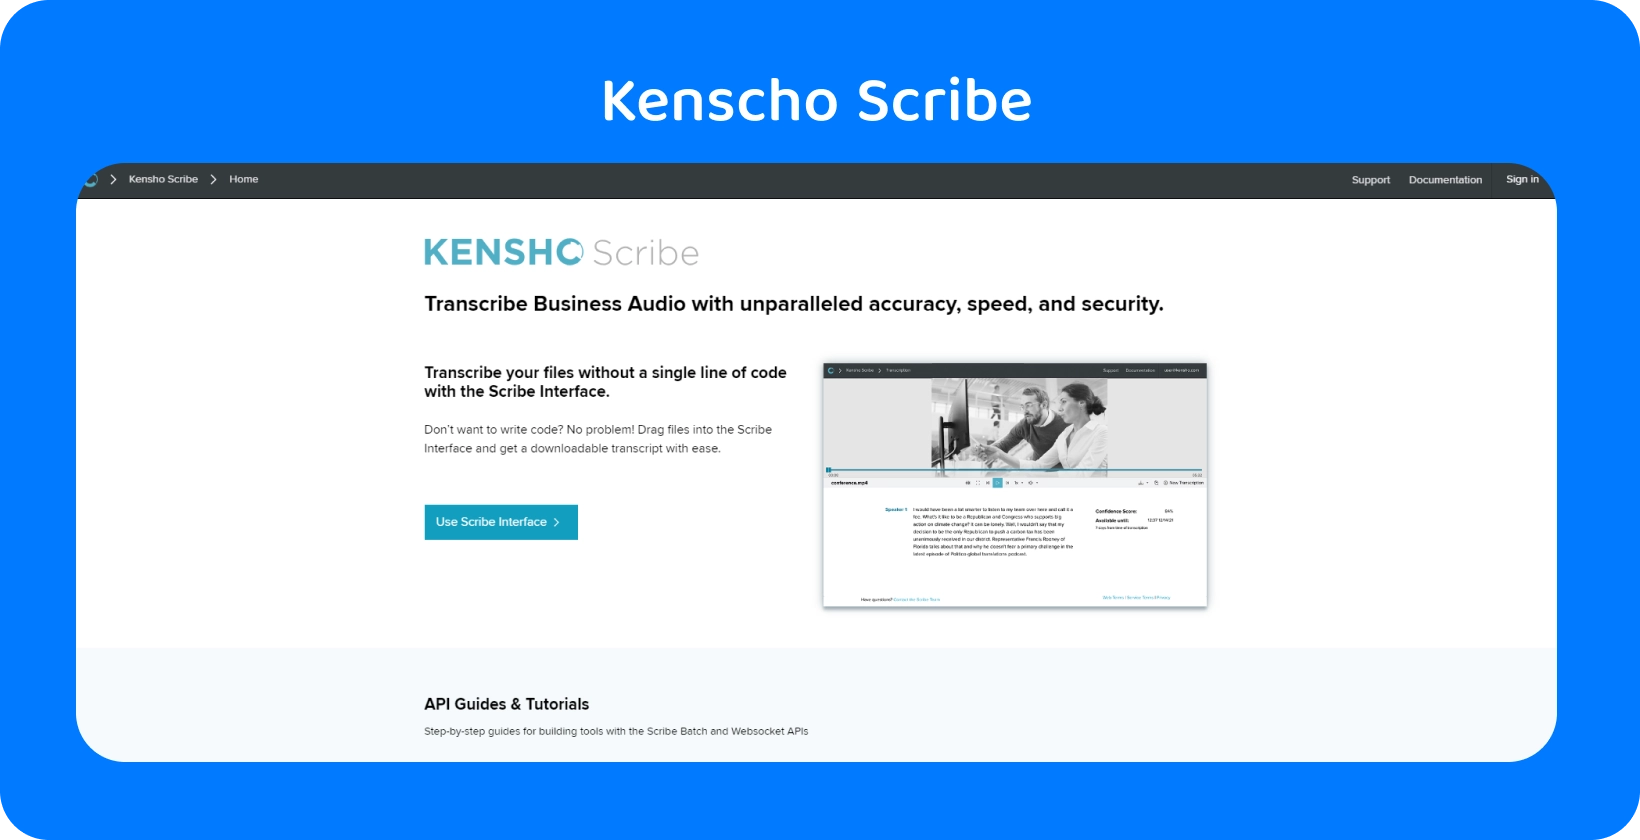 Kensho website page with 'SOLUTIONS' text, offering advanced AI tools that complement Word's dictation.